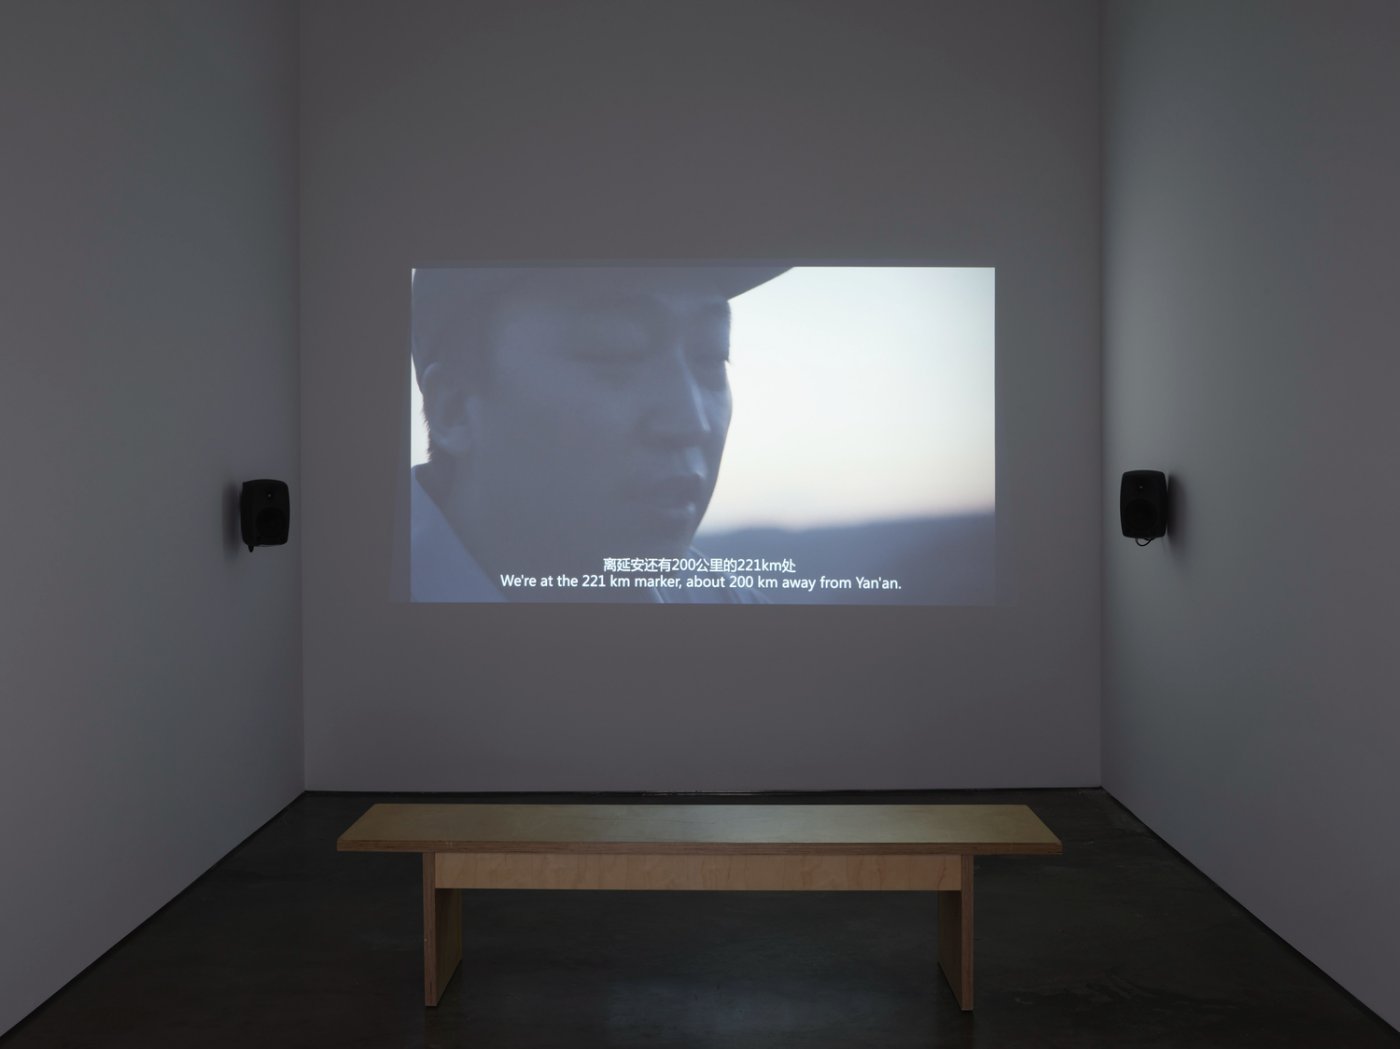 Installation image for Liu Xiaodong: Shaanbei, at Lisson Gallery